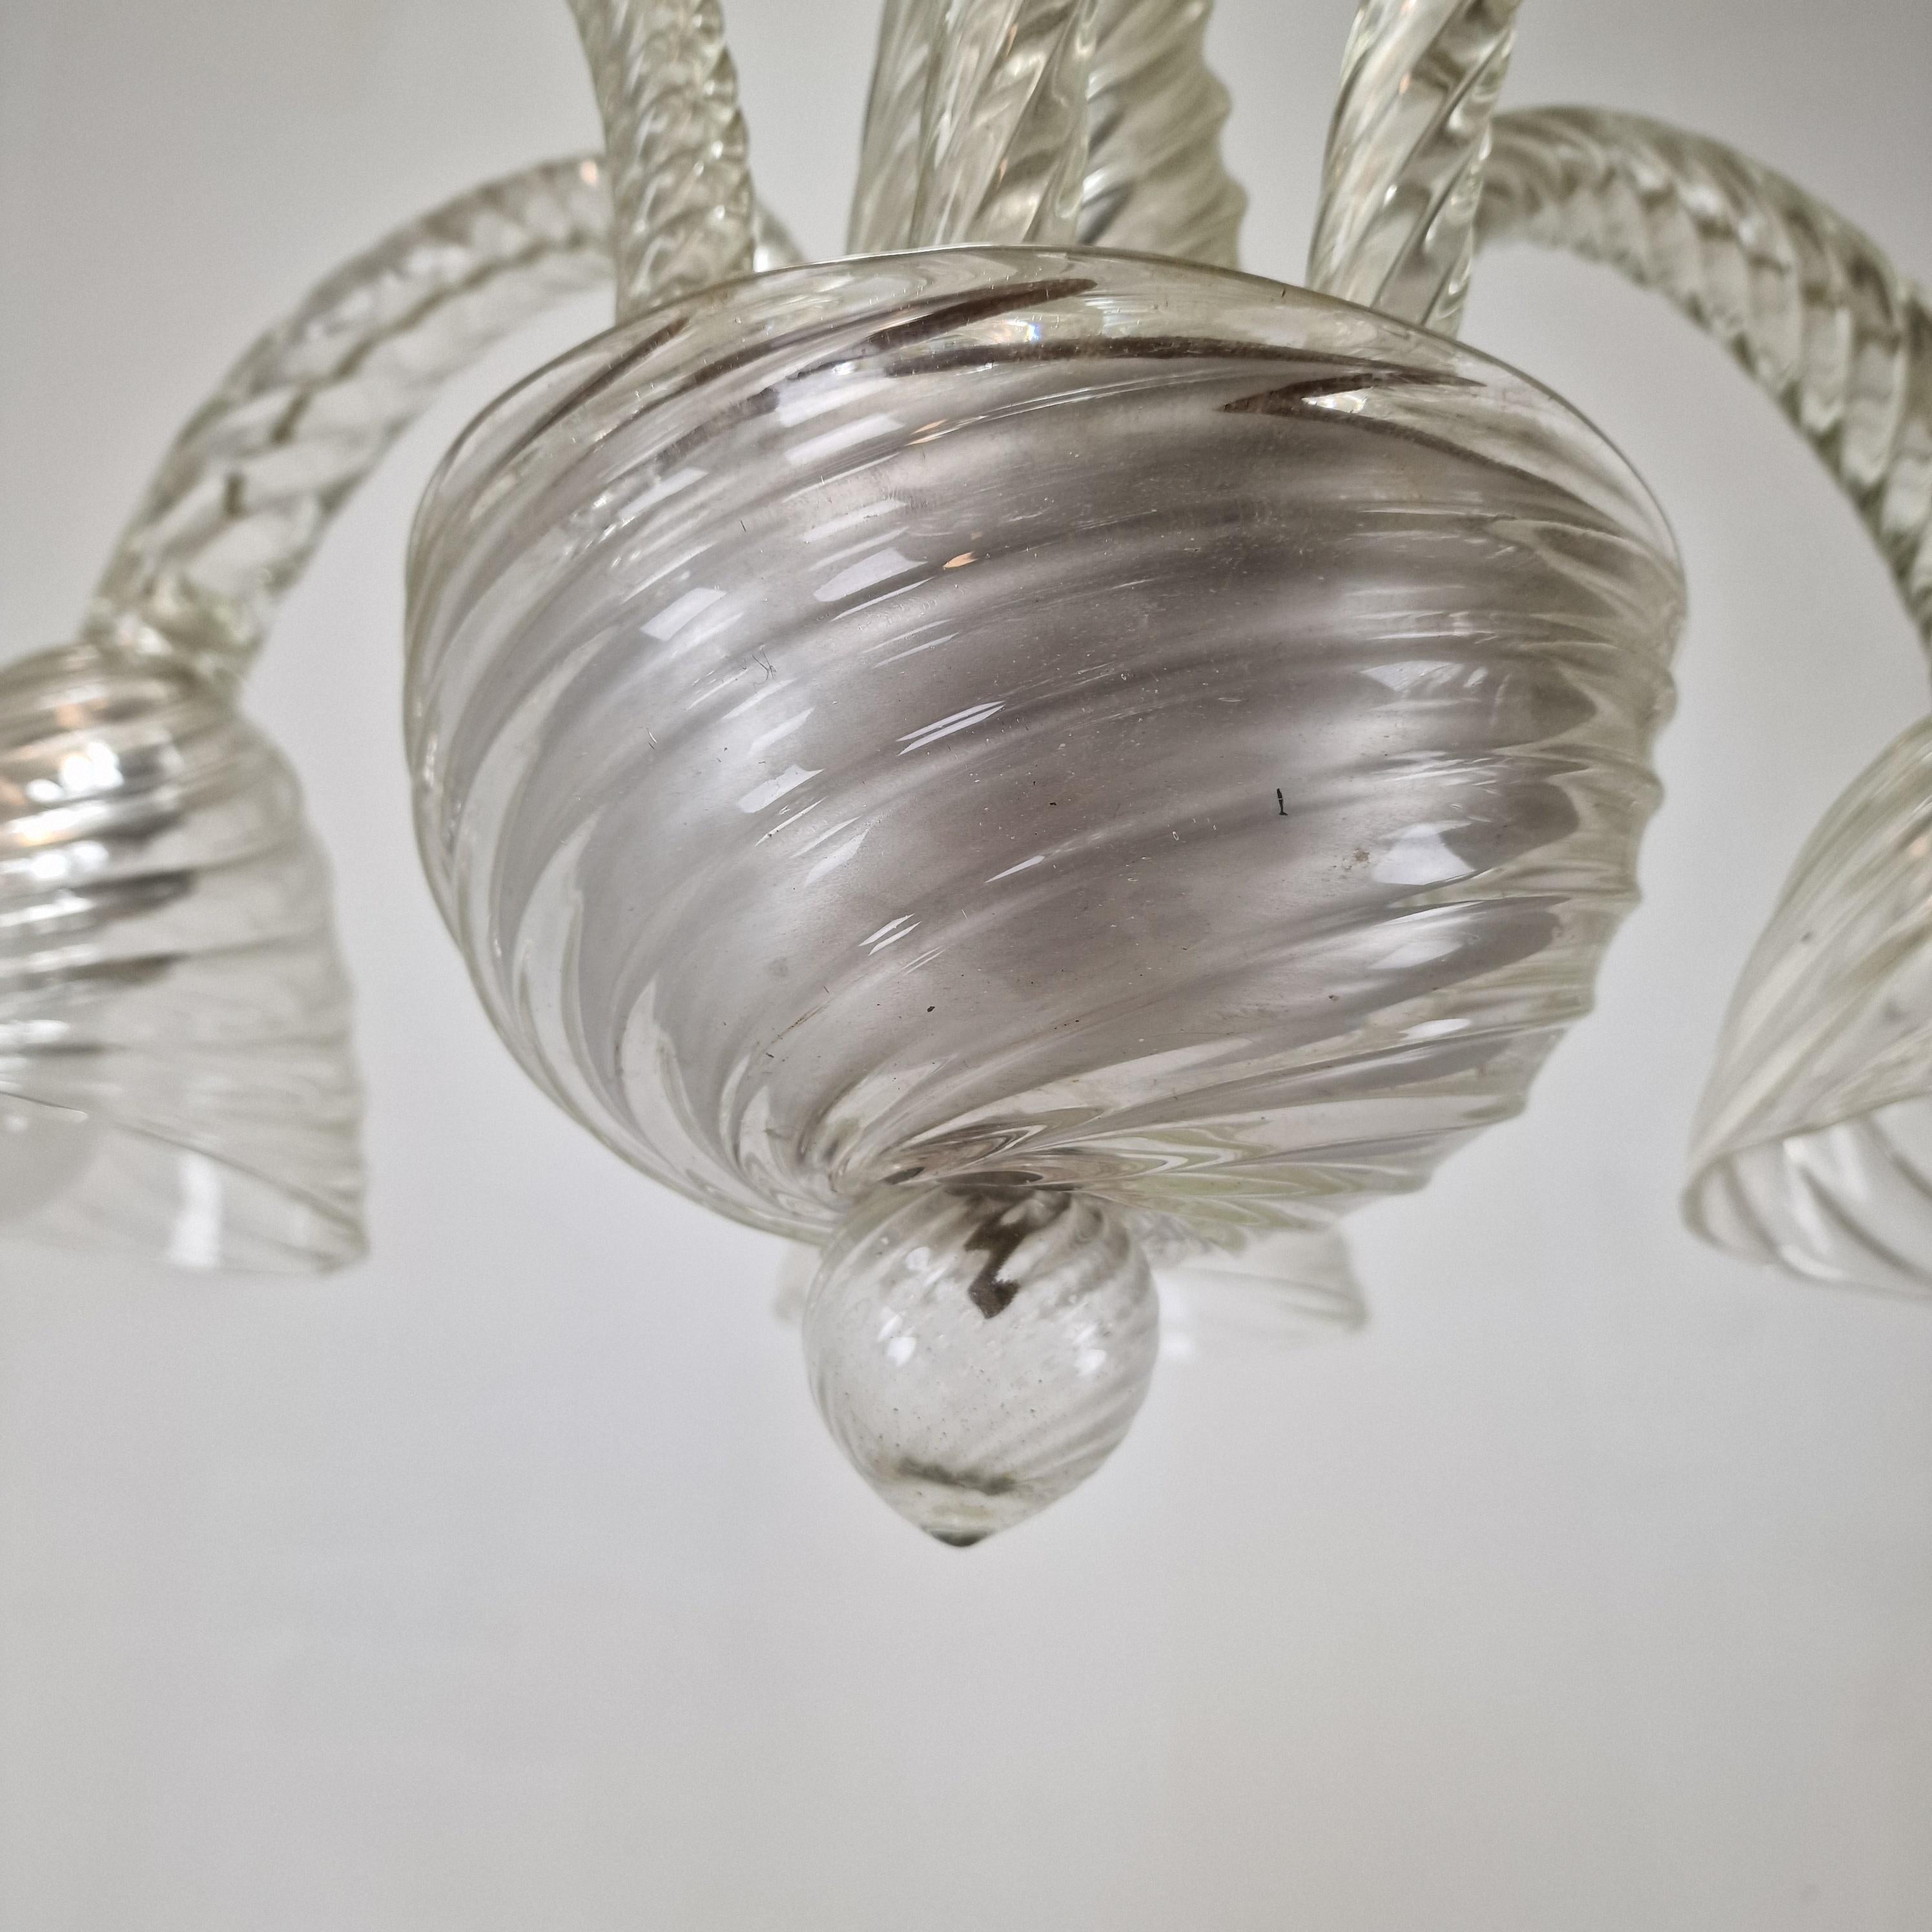 Barovier & Toso Murano Glass Chandelier, Italy 1950's For Sale 4